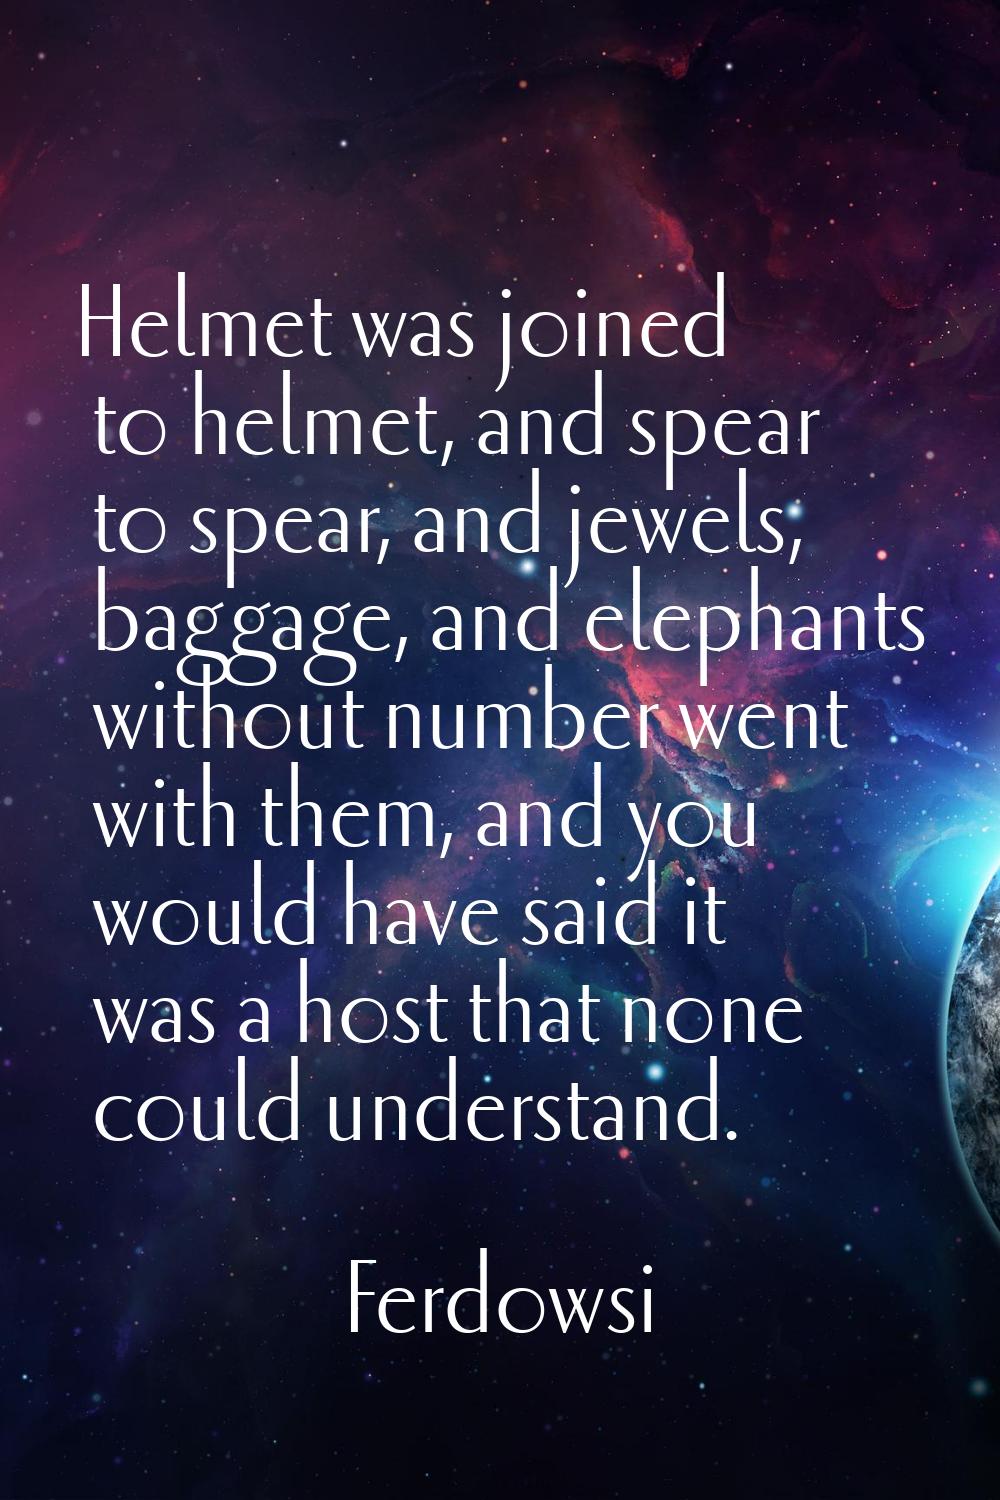 Helmet was joined to helmet, and spear to spear, and jewels, baggage, and elephants without number 